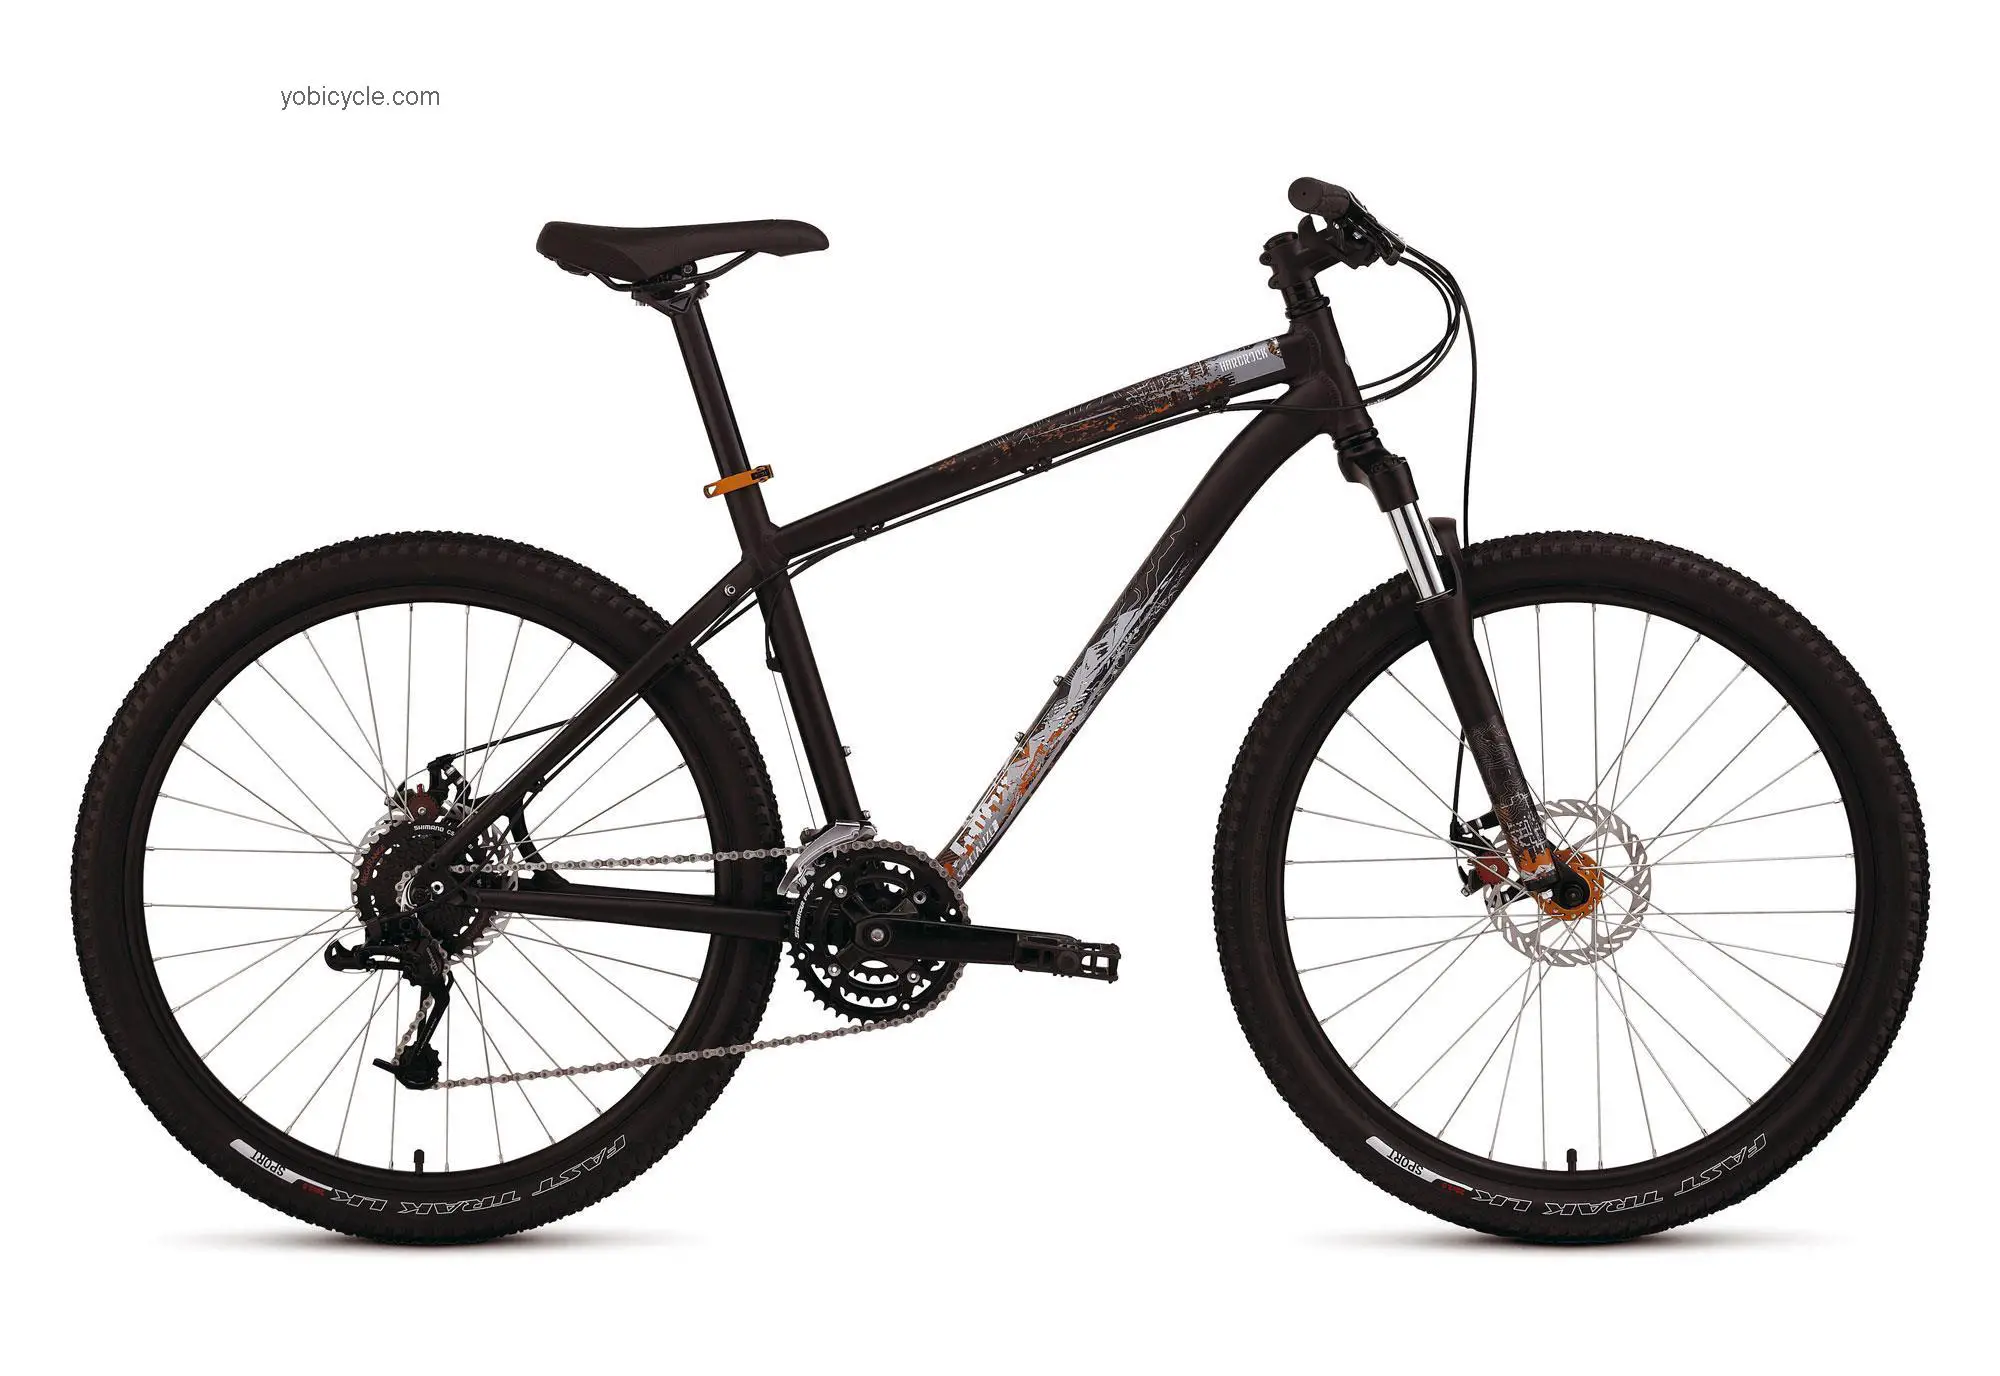 Specialized Hardrock Sport Disc 2012 comparison online with competitors